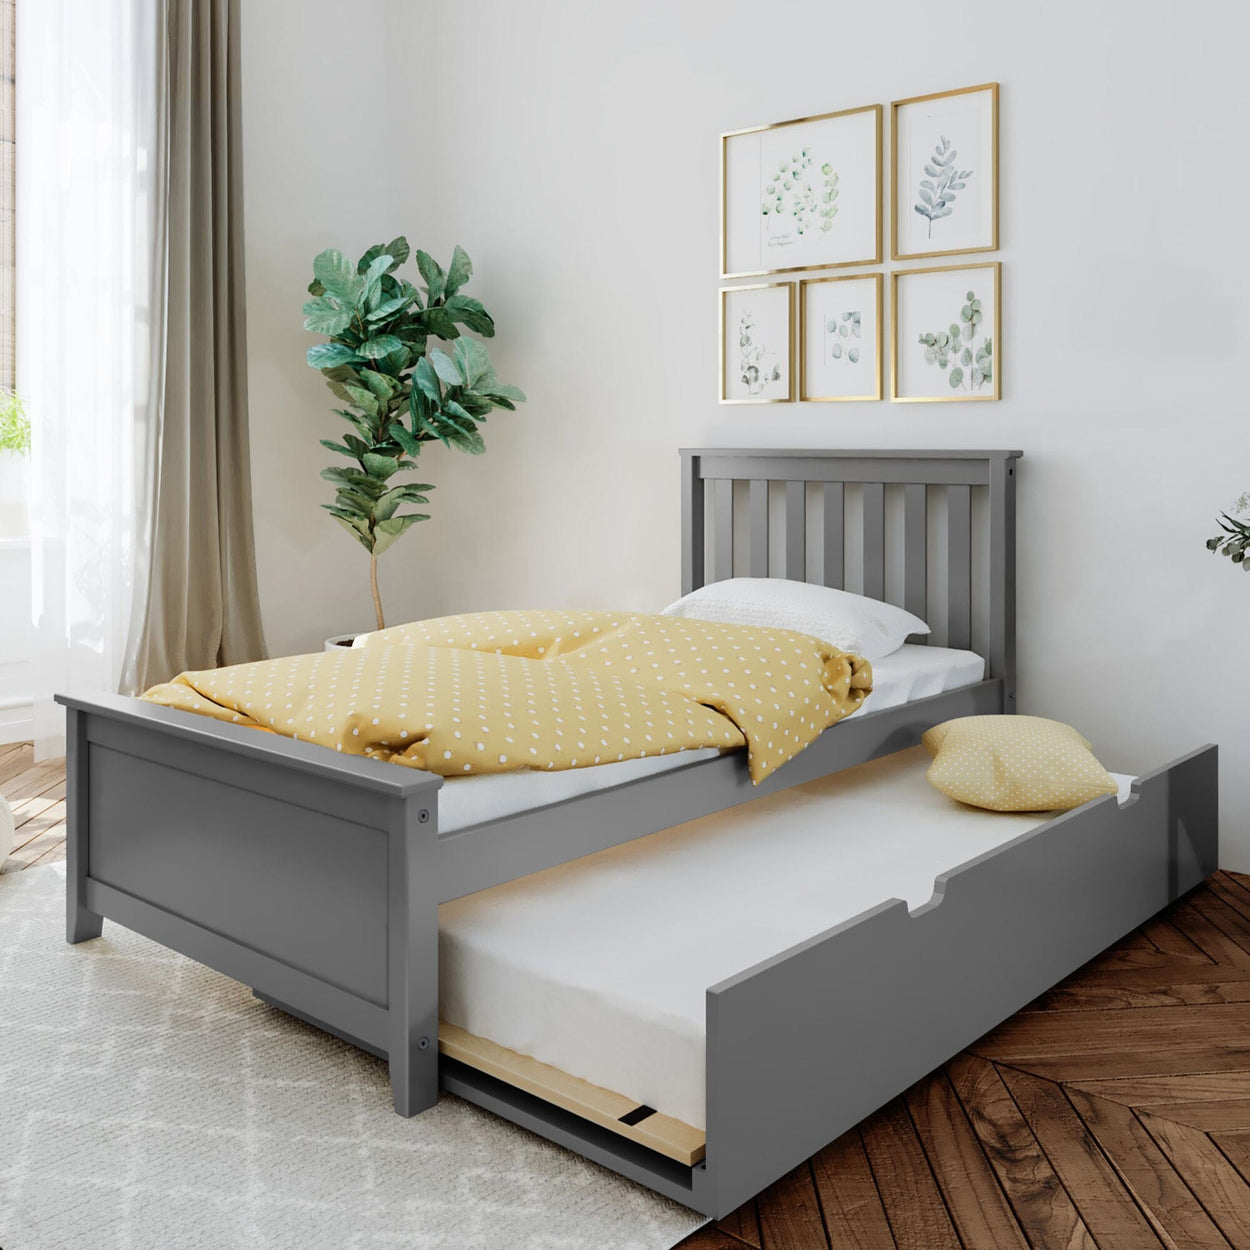 186210-121 : Kids Beds Twin-Size Bed with Trundle, Grey